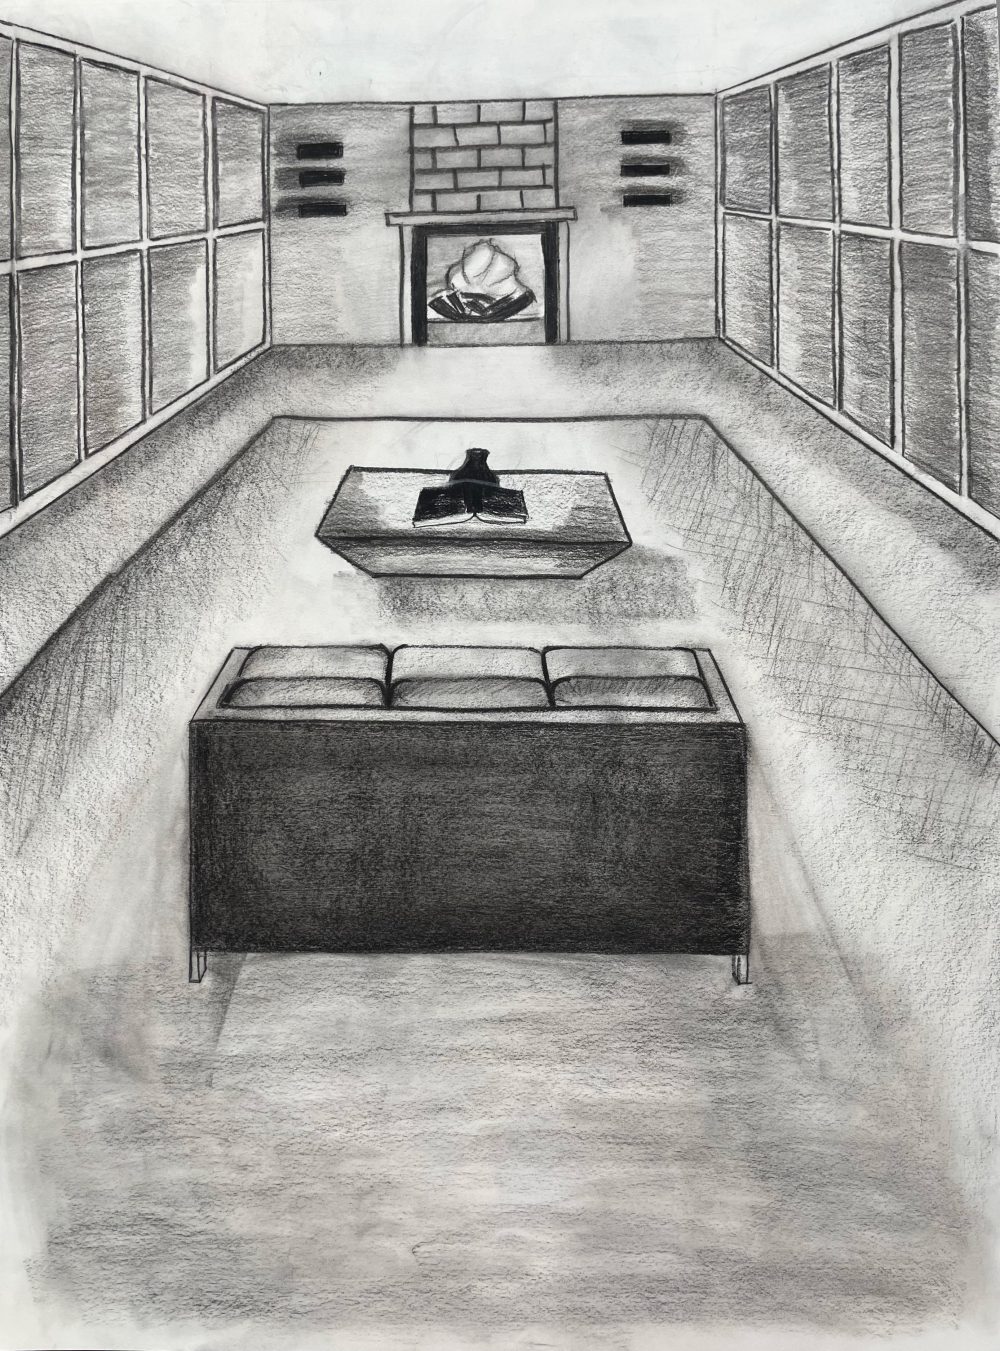 A charcoal drawing, depicting an interior space in linear perspective.